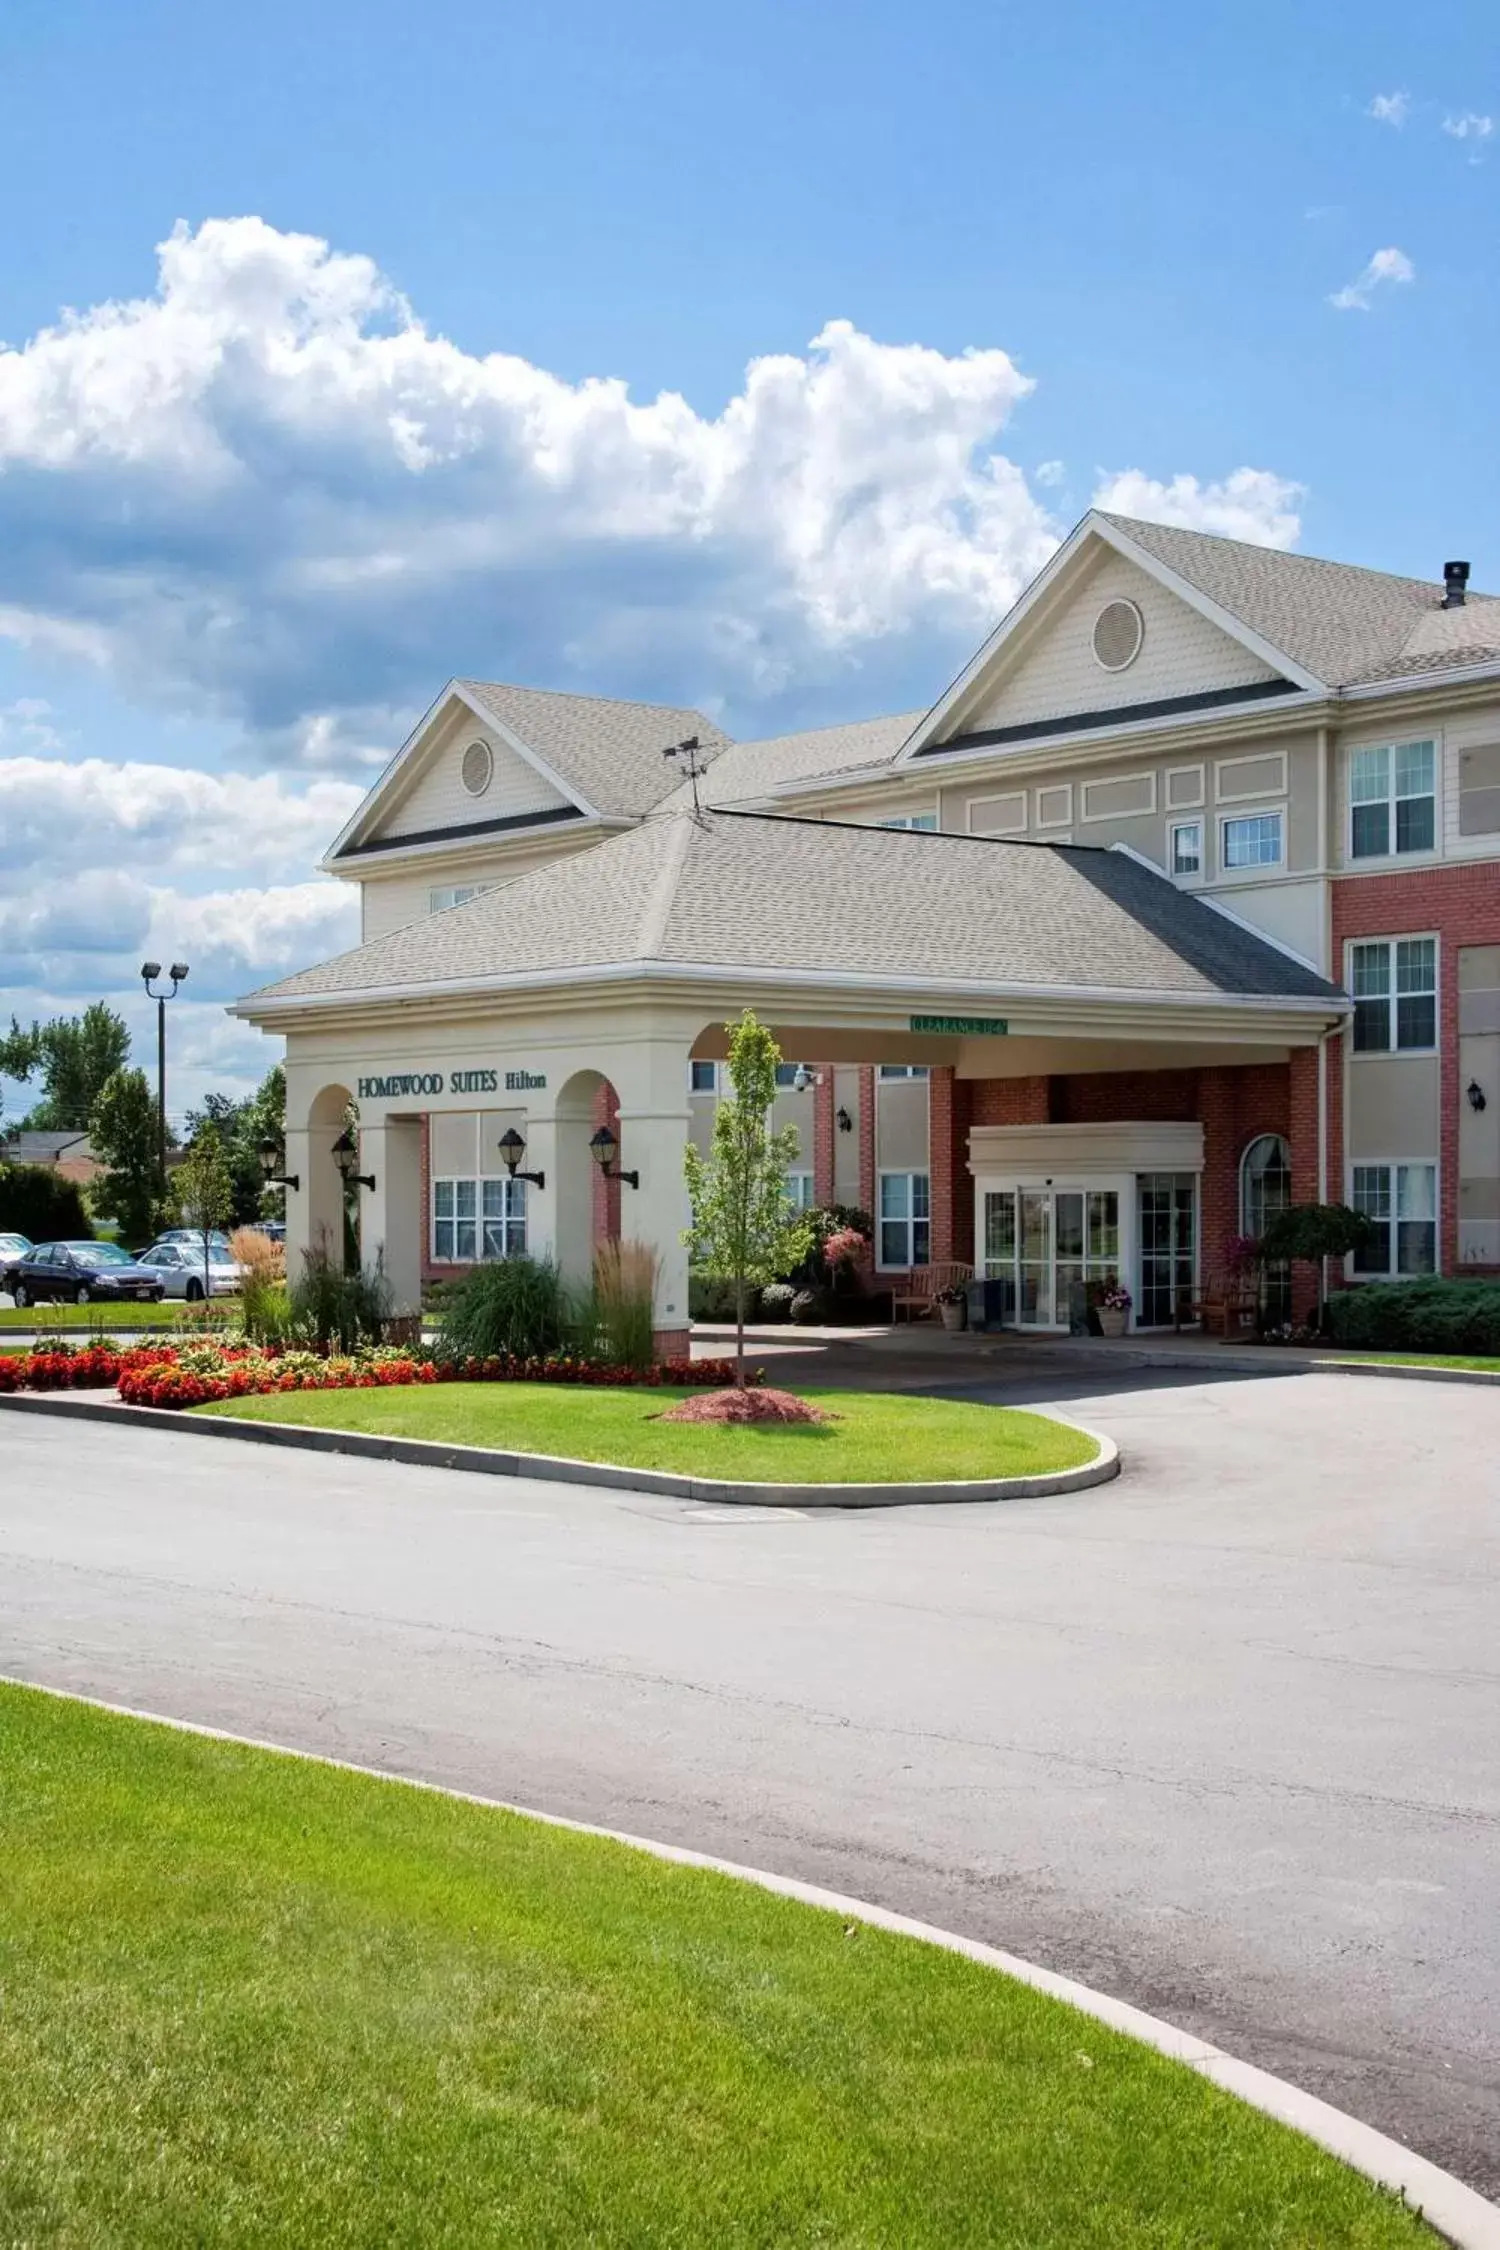 Property Building in Homewood Suites by Hilton Buffalo/Airport